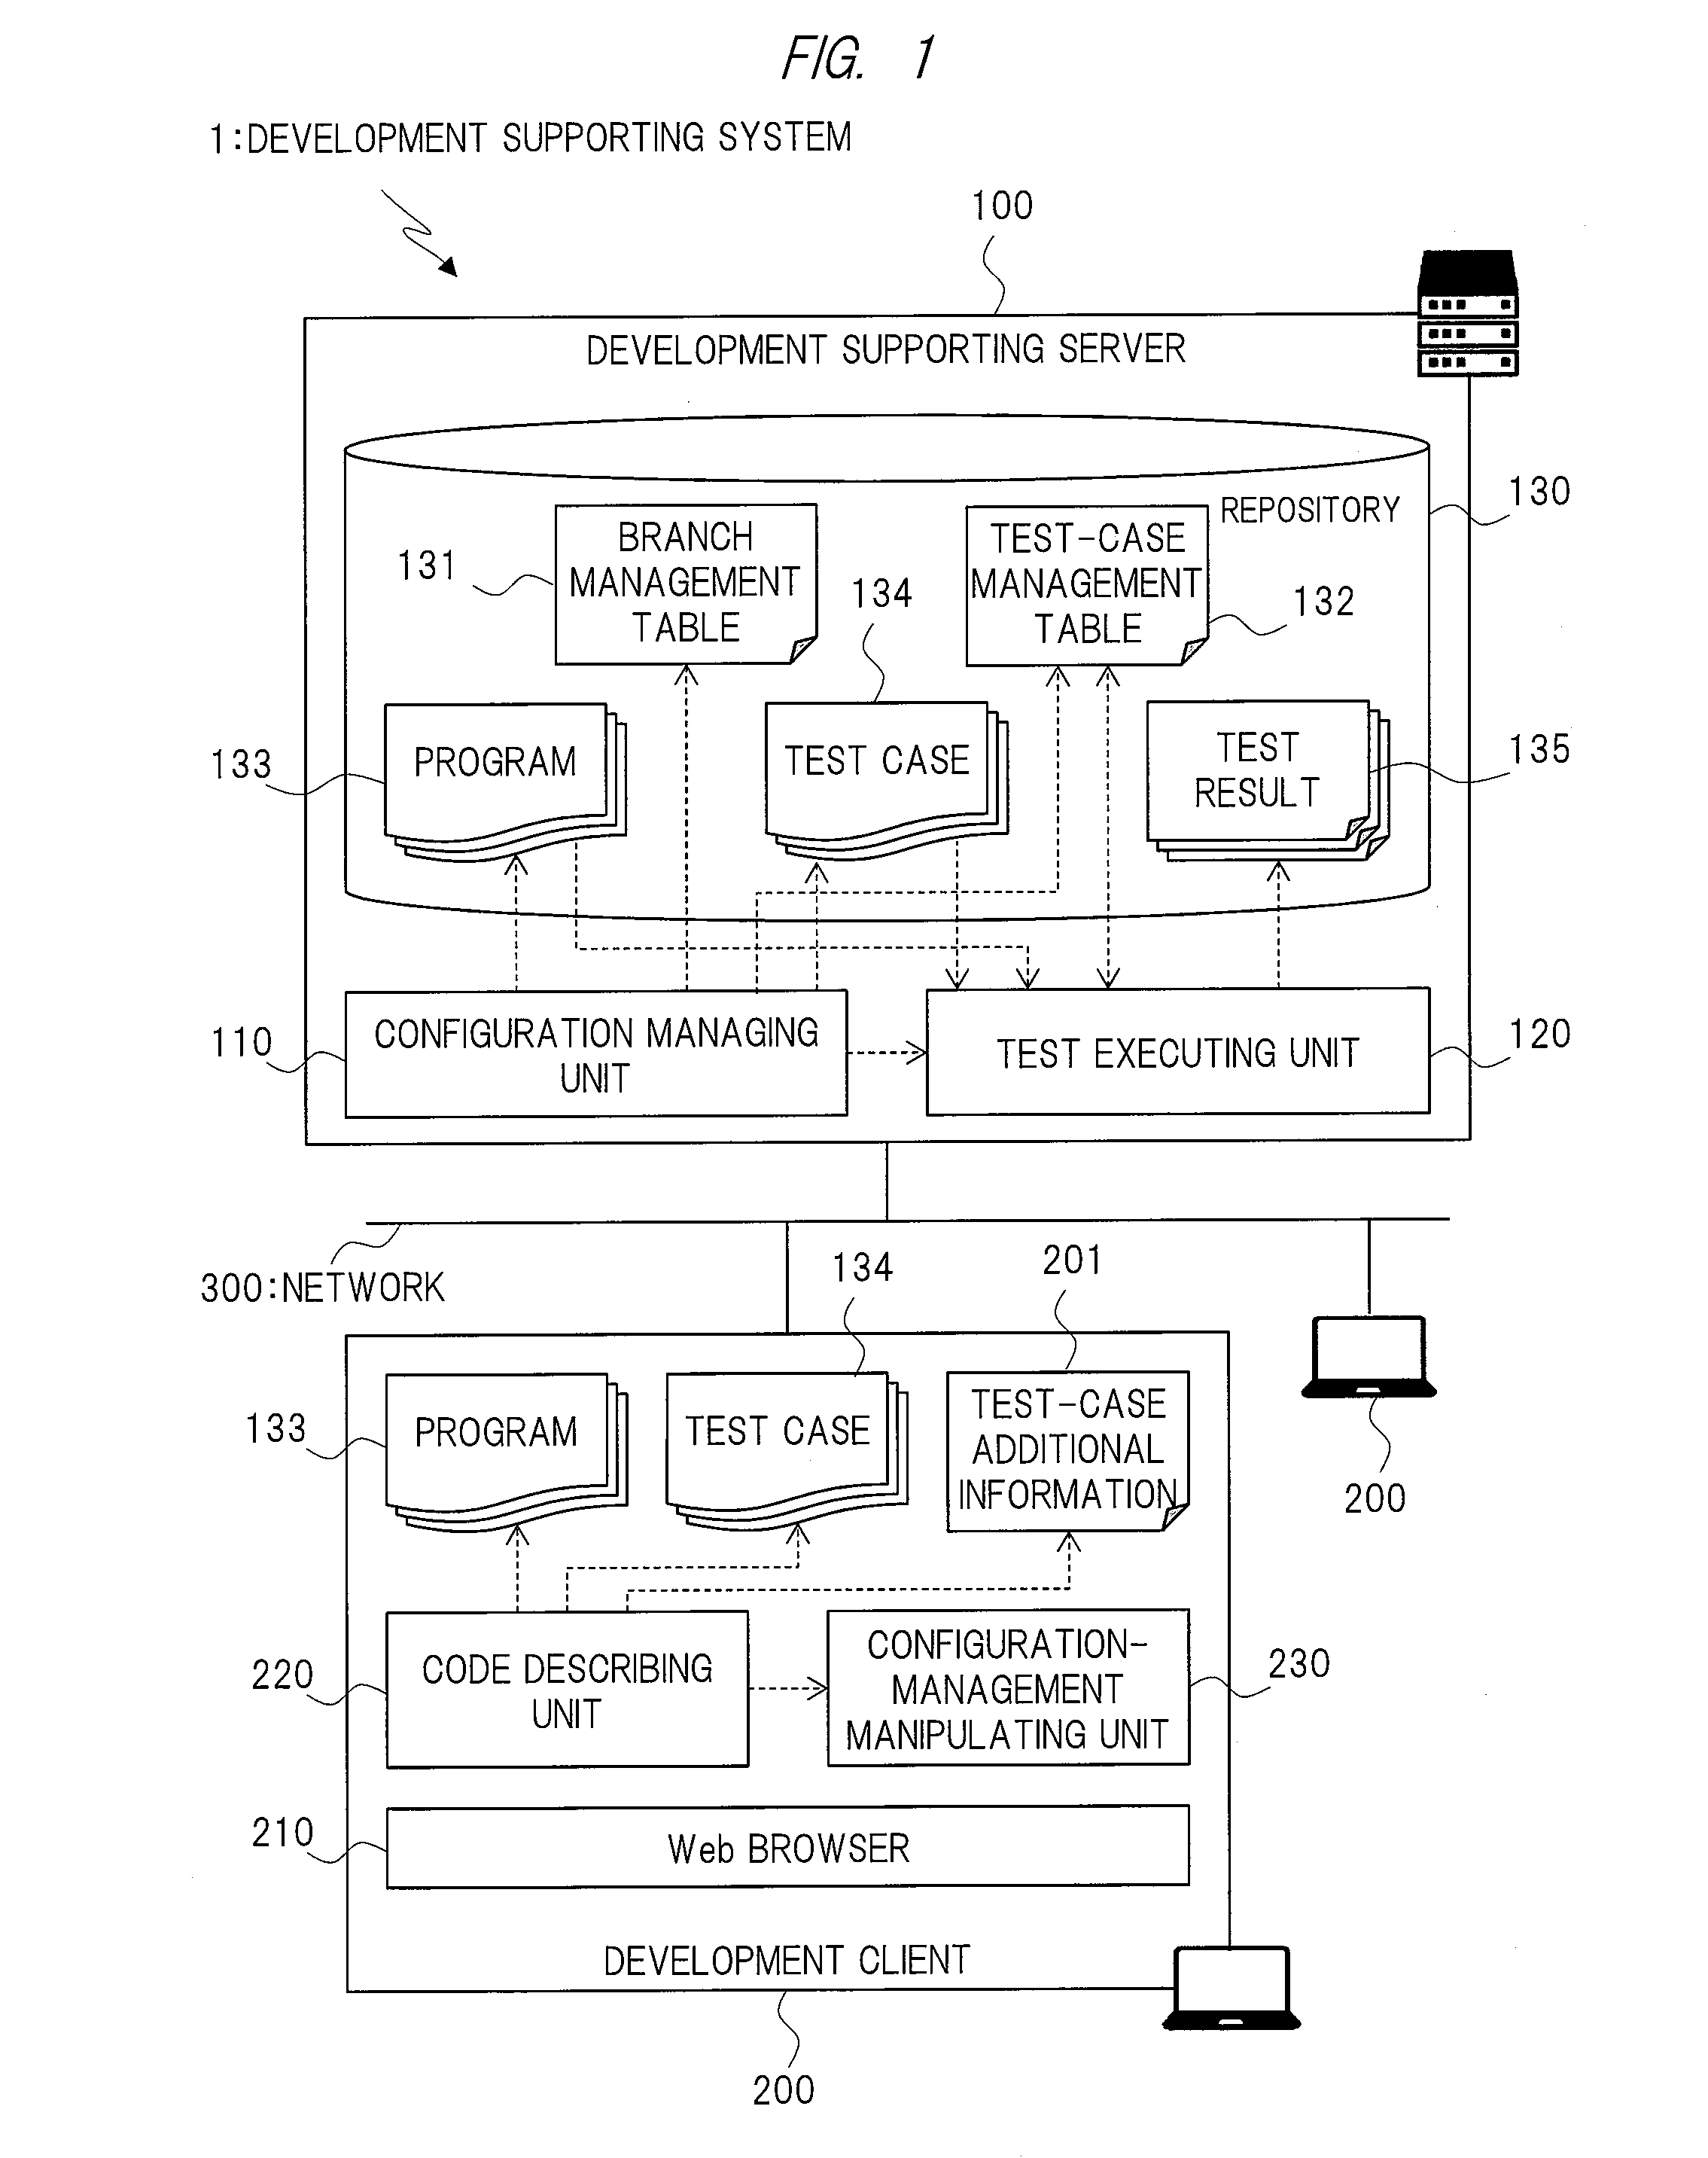 Development supporting system